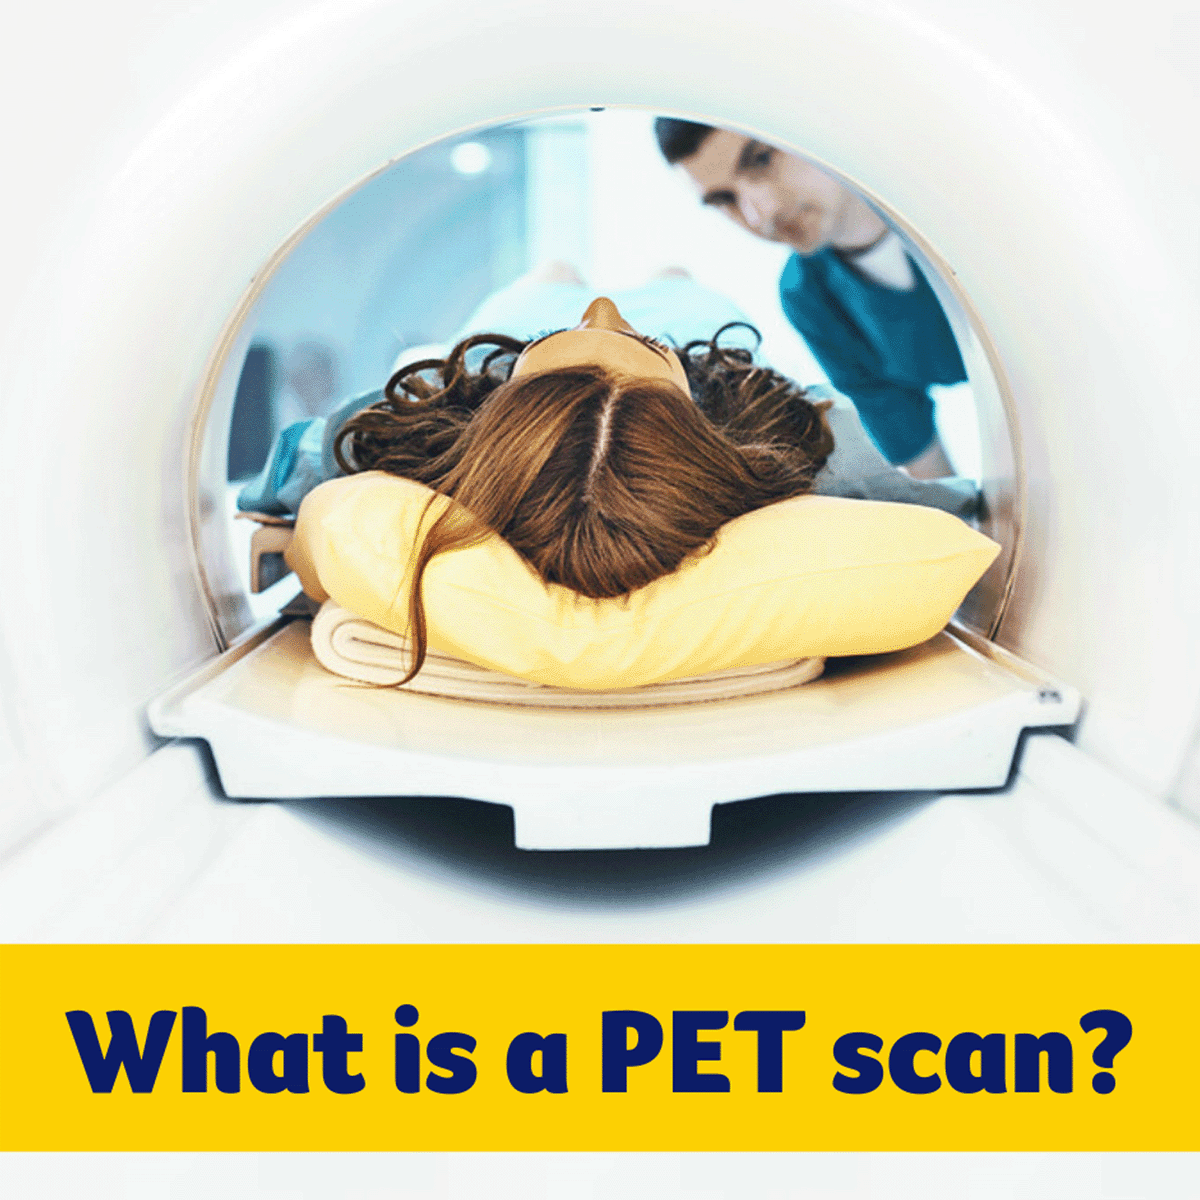 A woman in lying down going into a PET scan with a burse leaning down to speak to her